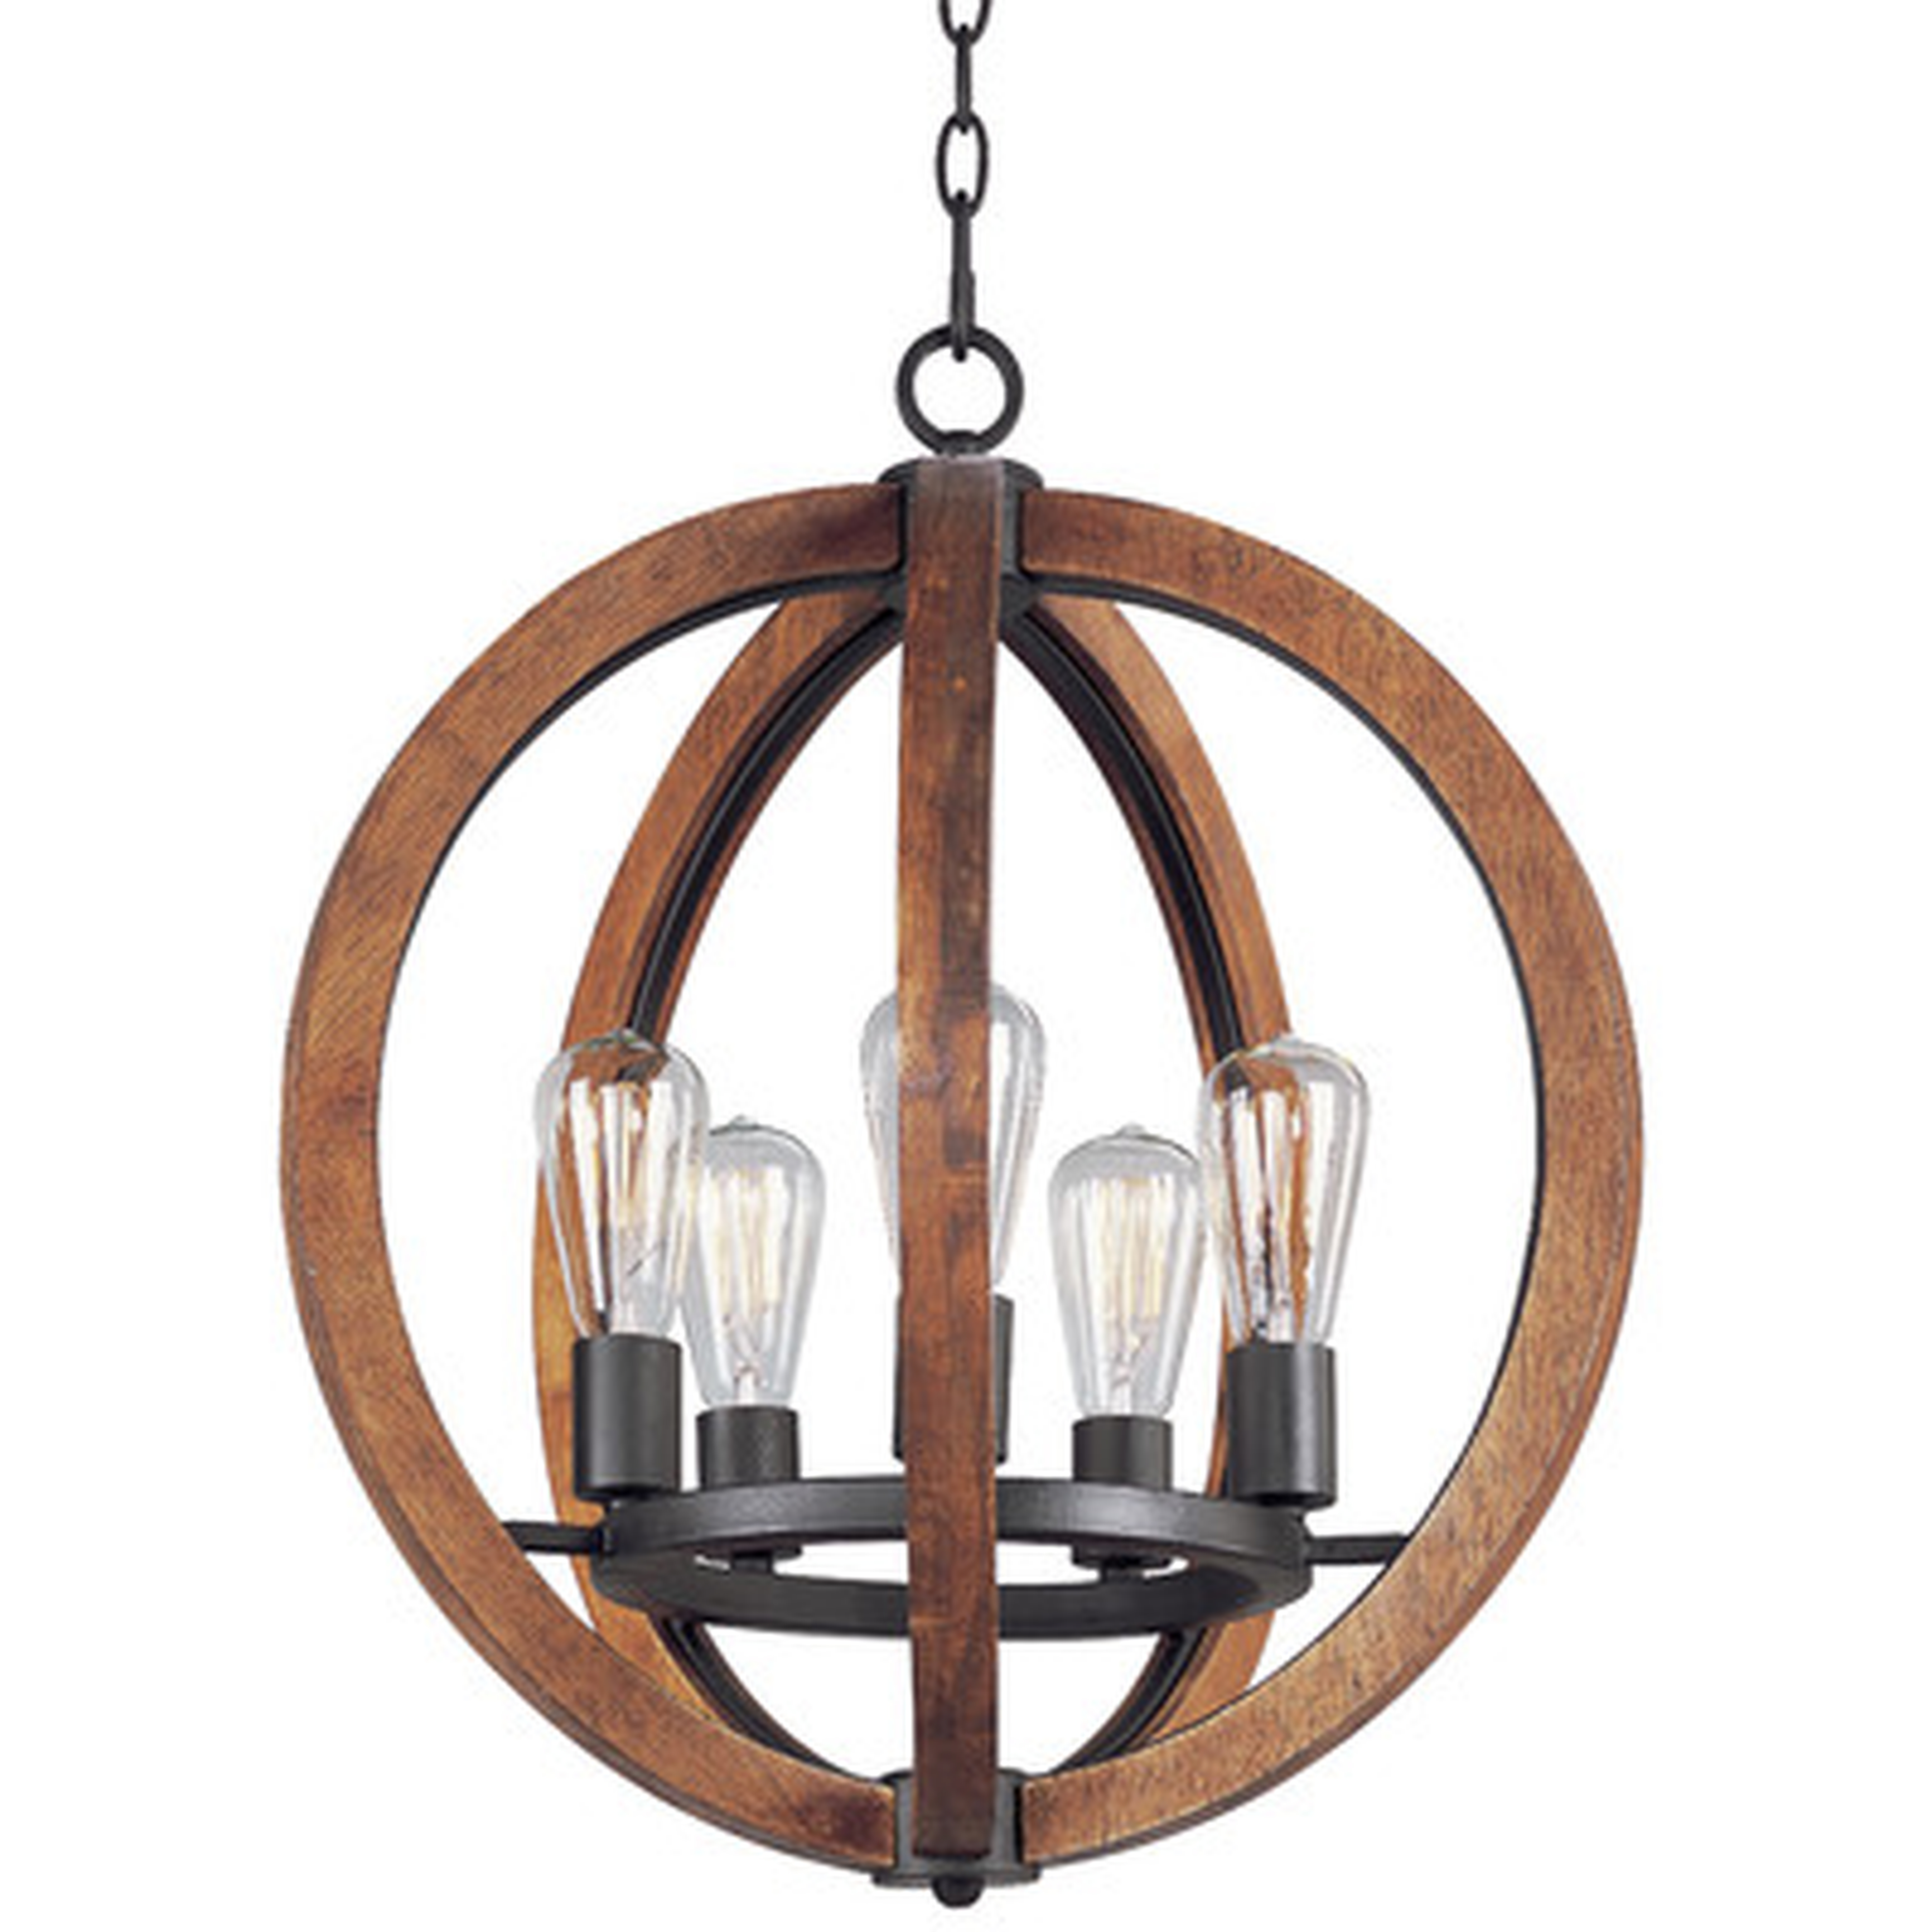 Orly 5 - Light Unique / Statement Globe Chandelier with Wood Accents - AllModern